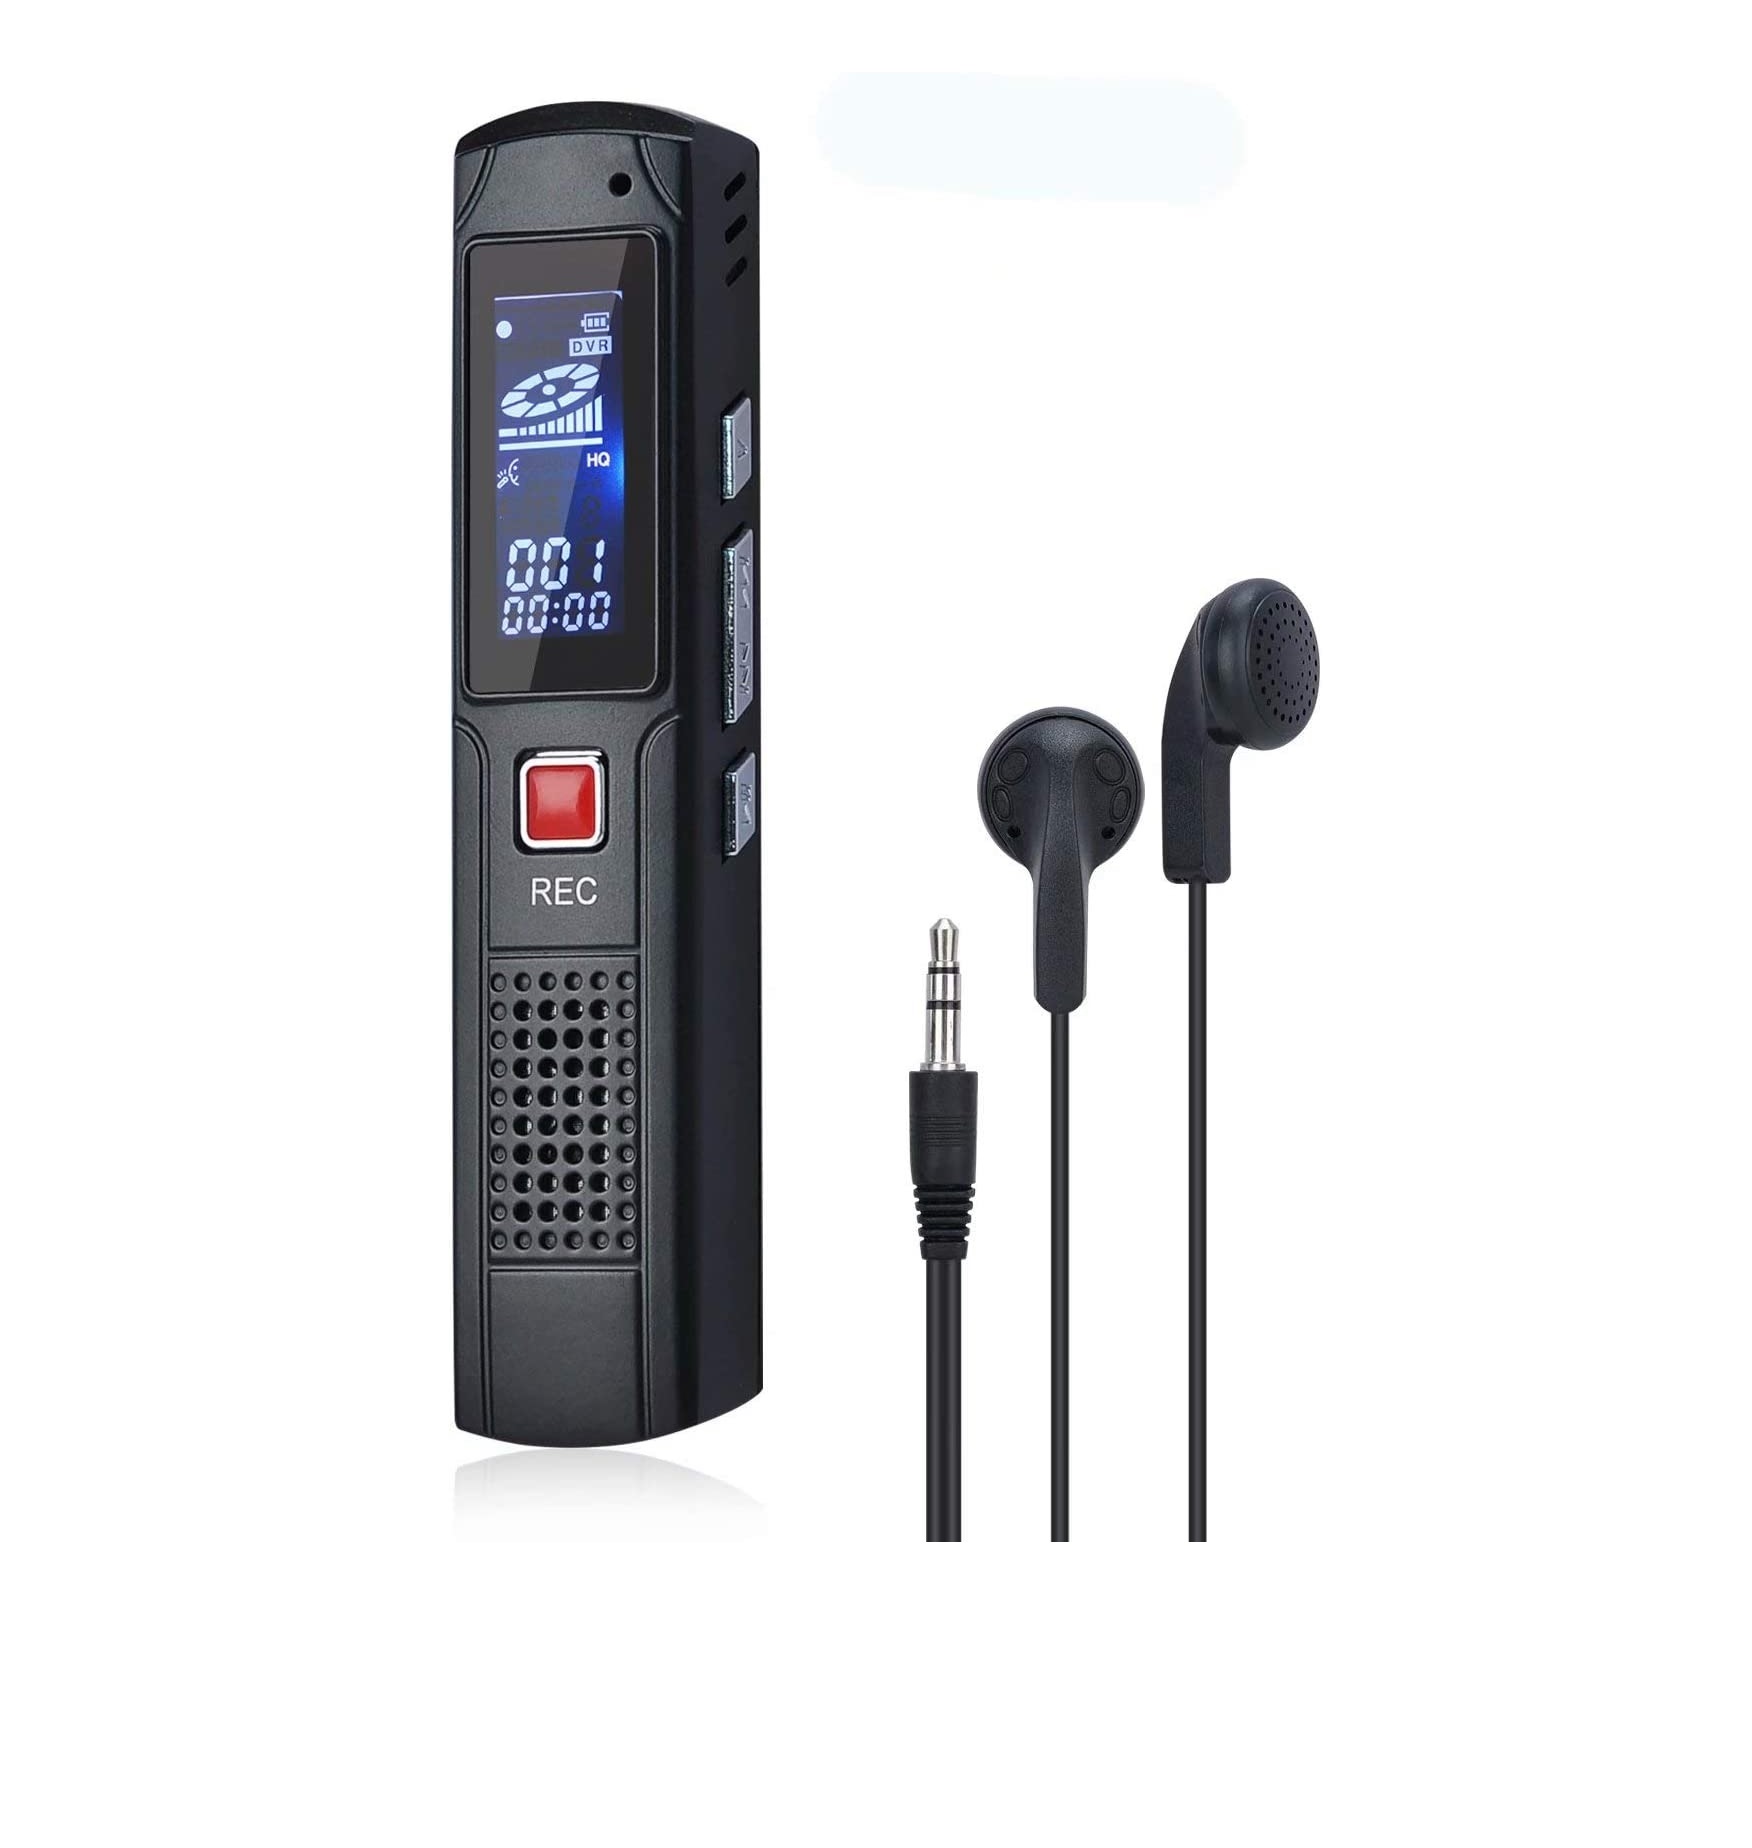 SAFETYNET 8GB Digital Audio Voice Recorder Ditacphone MP3 Music Player A-B Repeating